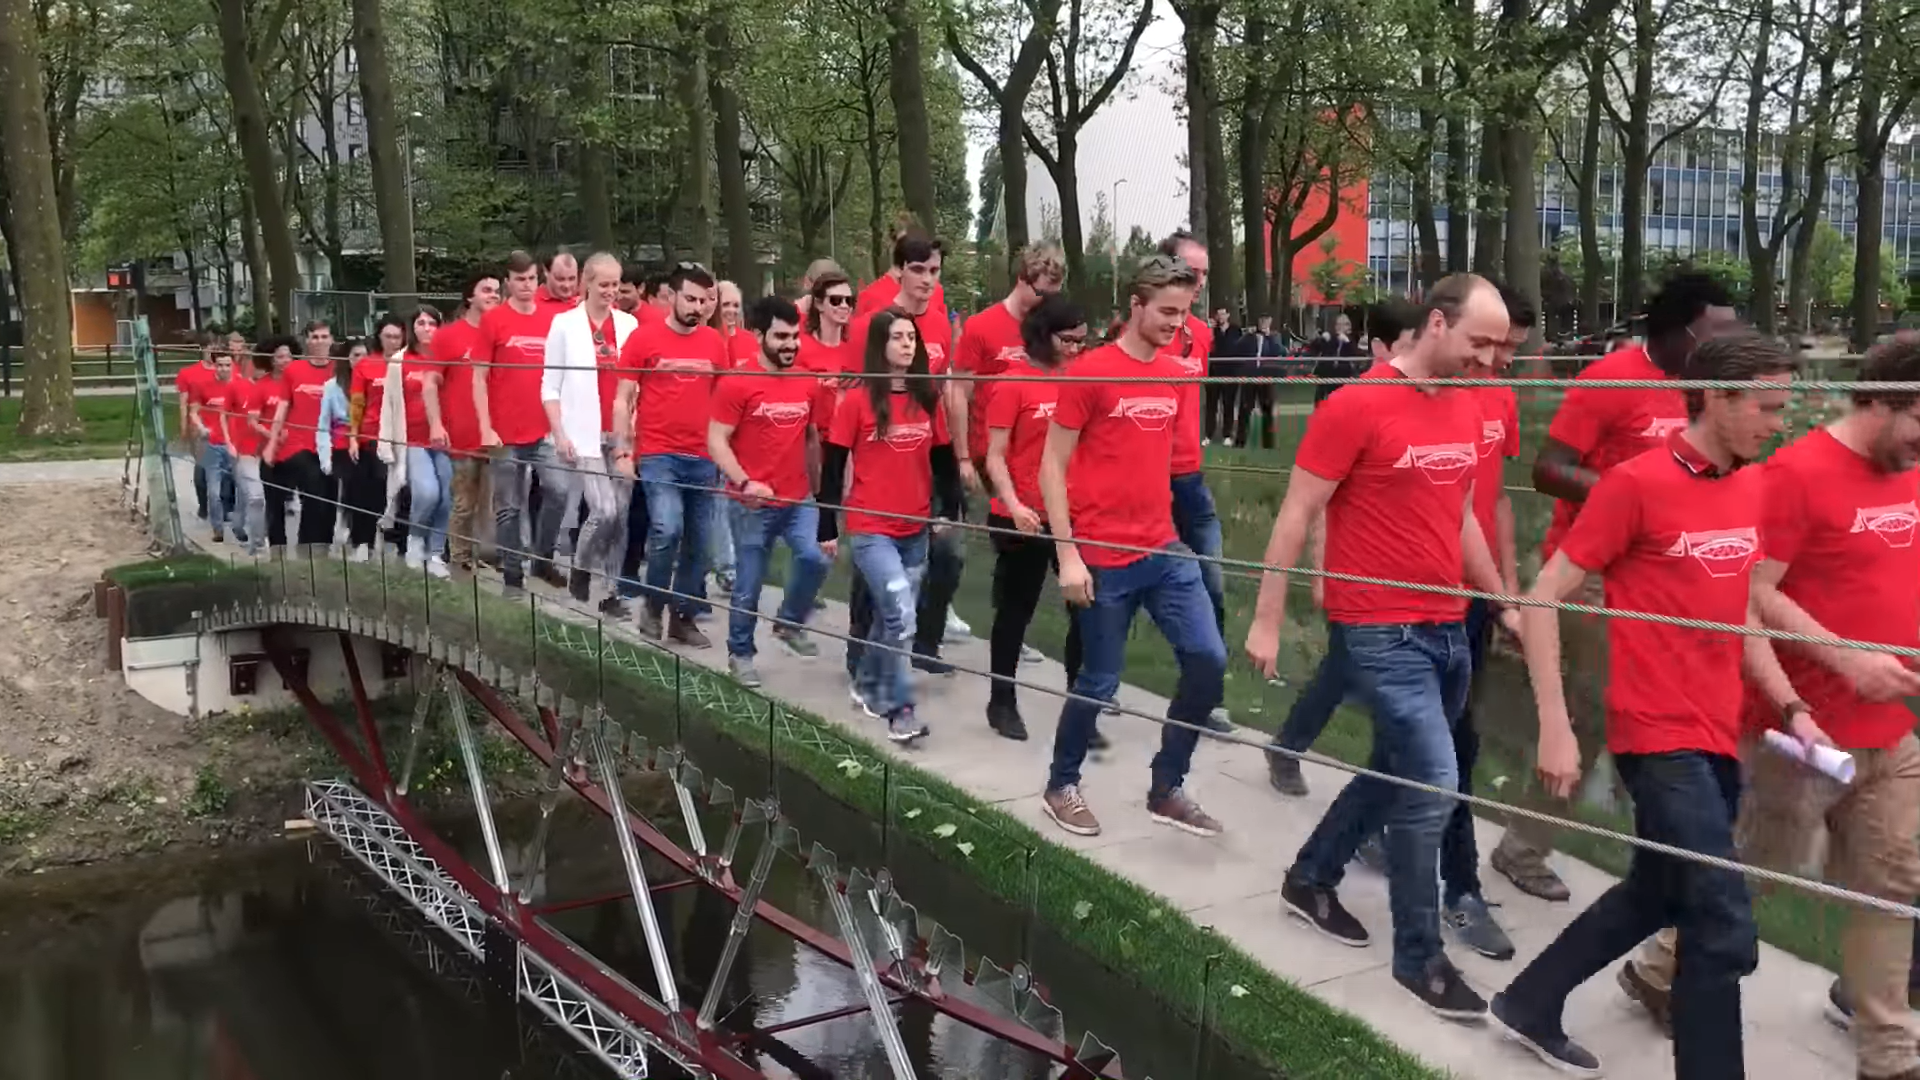 Students in red t-shirts cross the glass bridge at the Delft University of Technology in the Netherlands